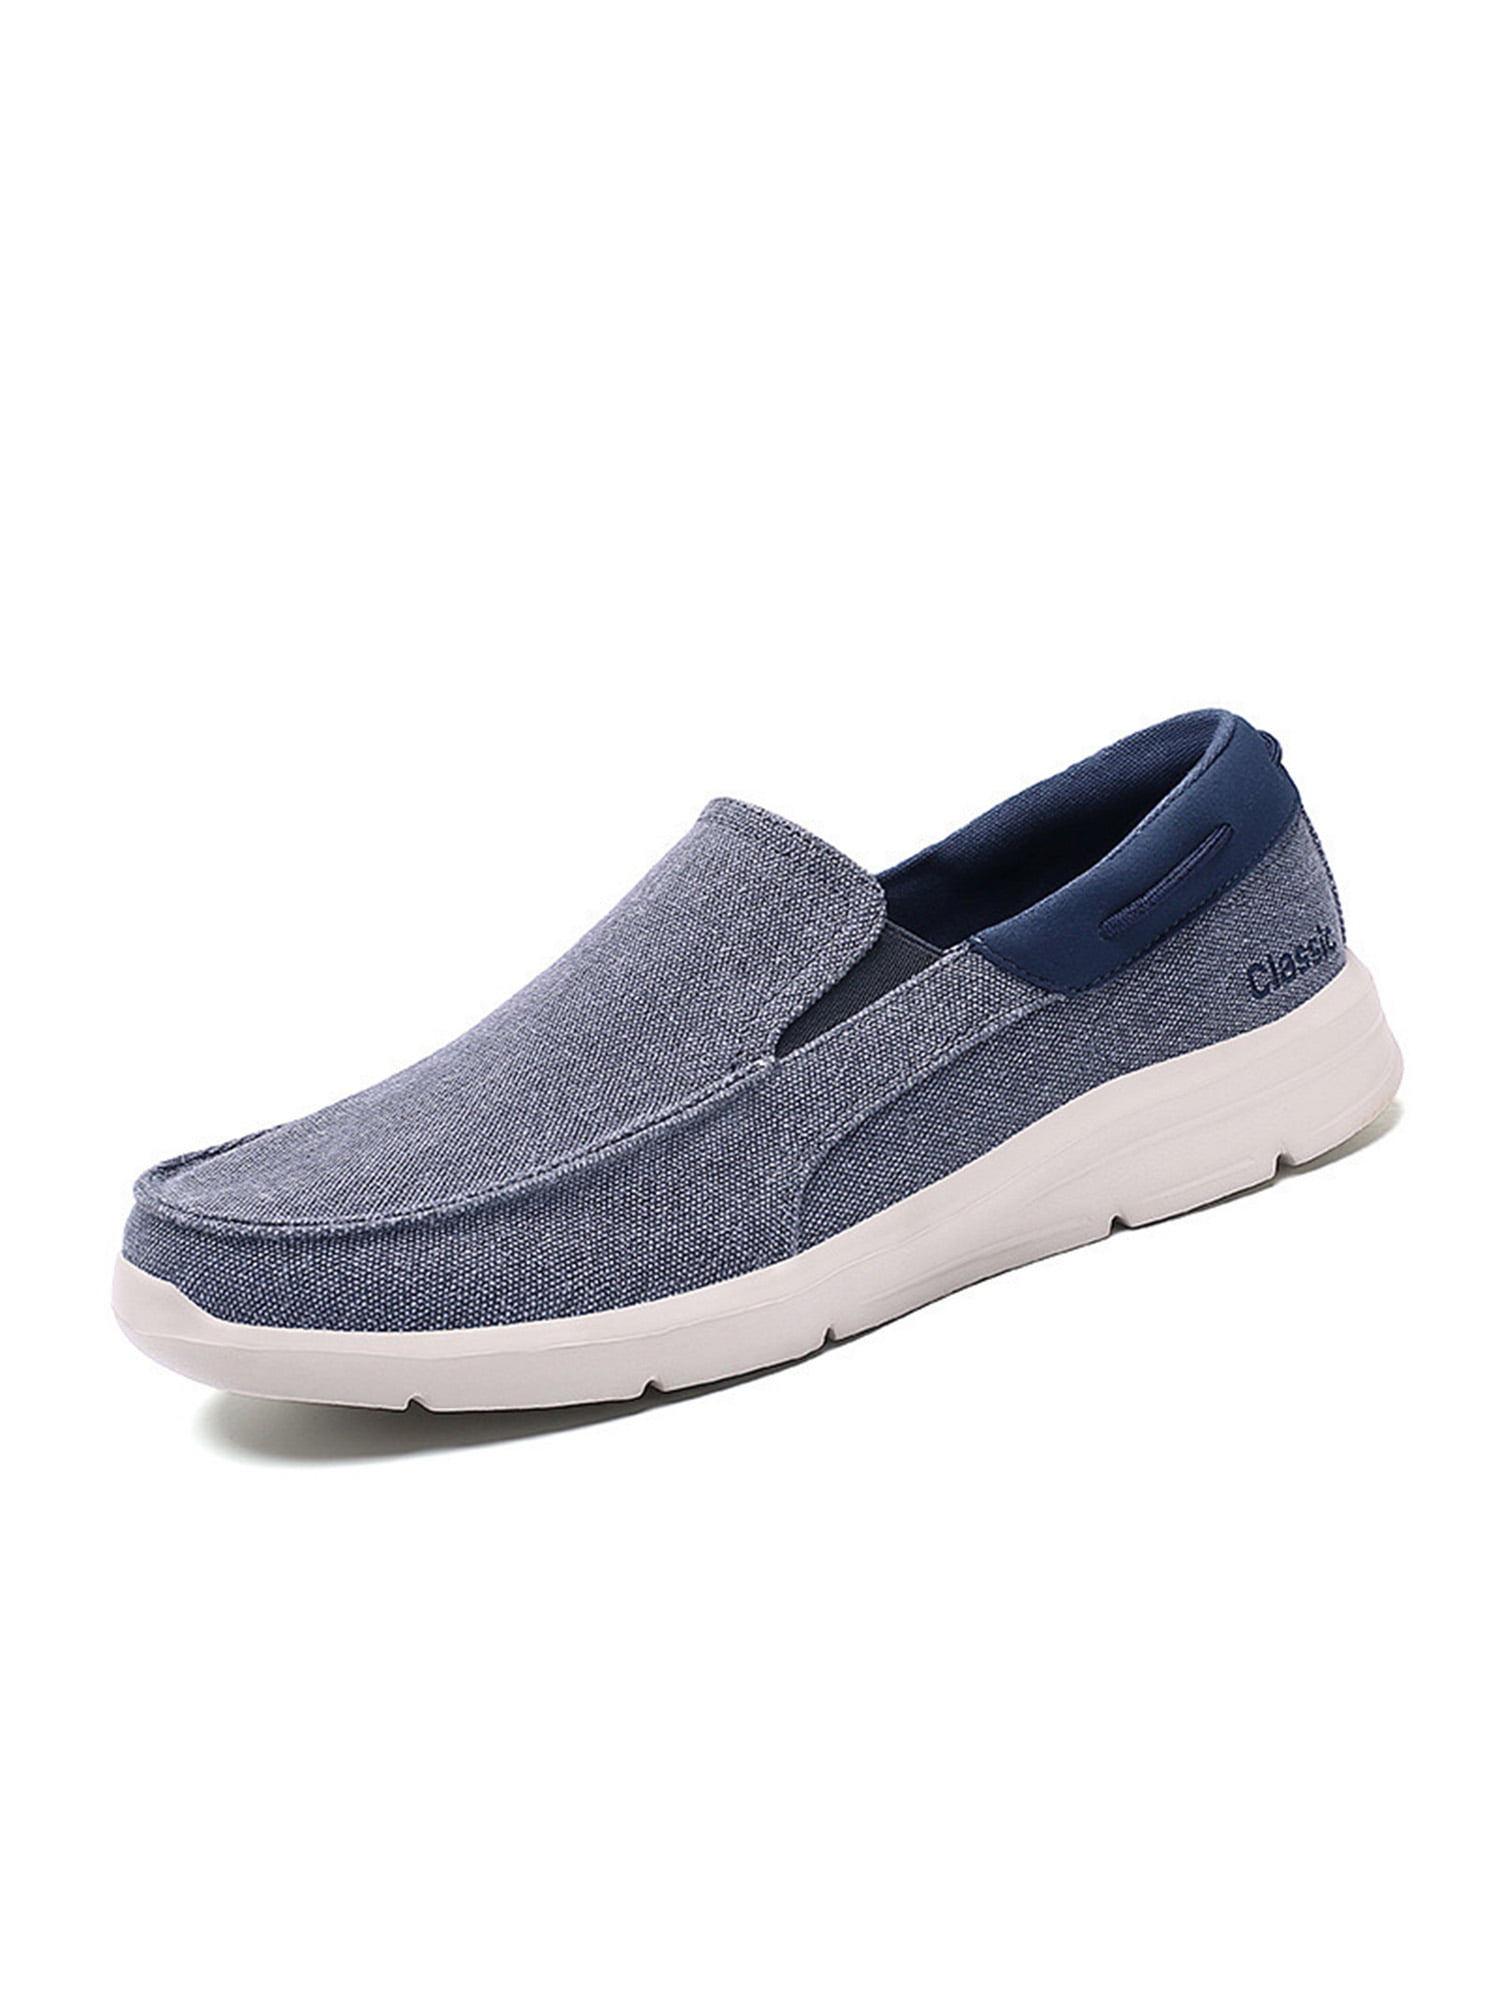 Men's Leisure Canvas Shoe Trend Breathable Sneakers Slip-on Loafers Comfortable 